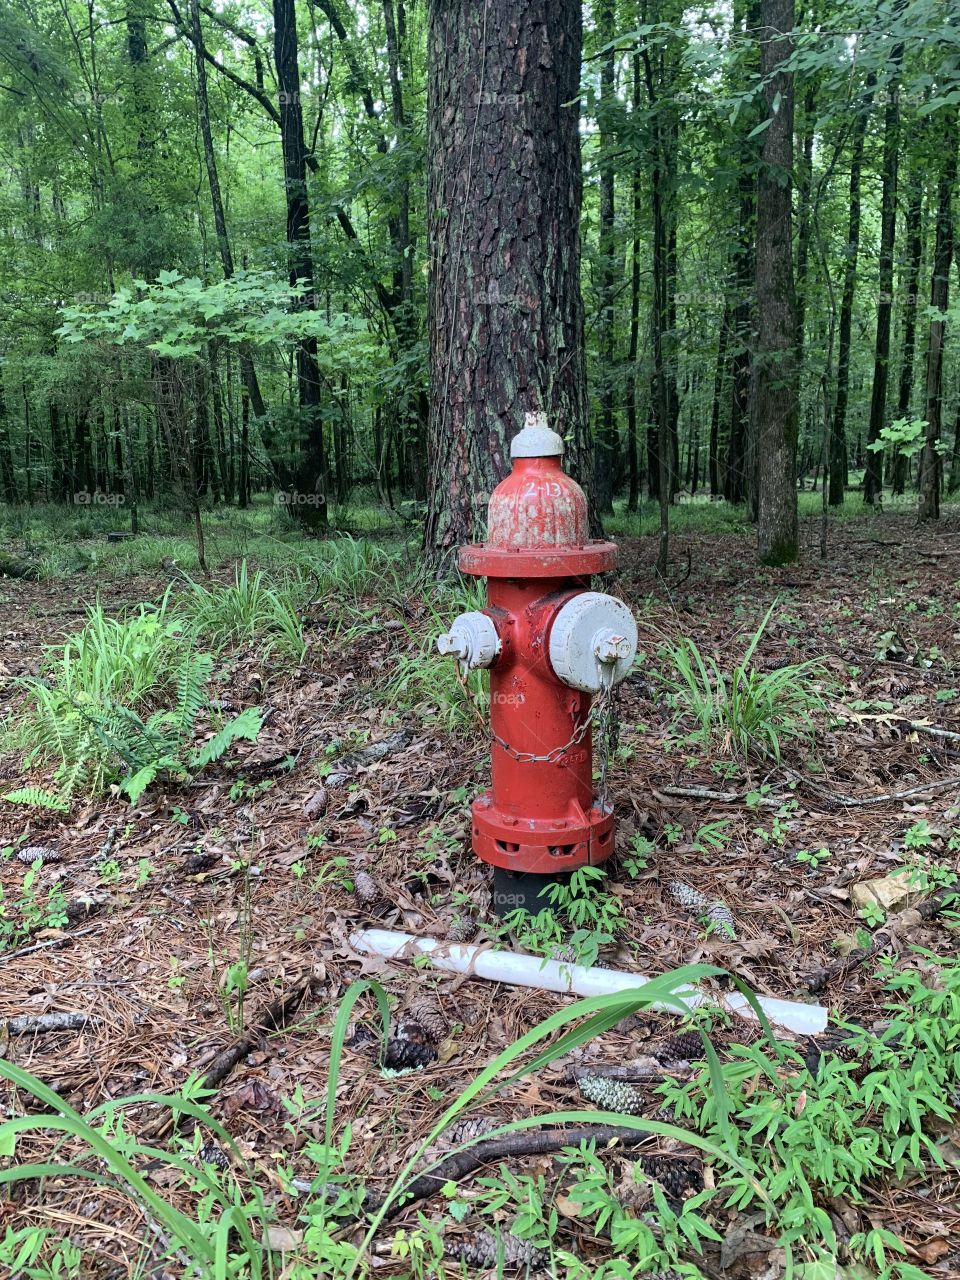 Fire Hydrant in the Forest